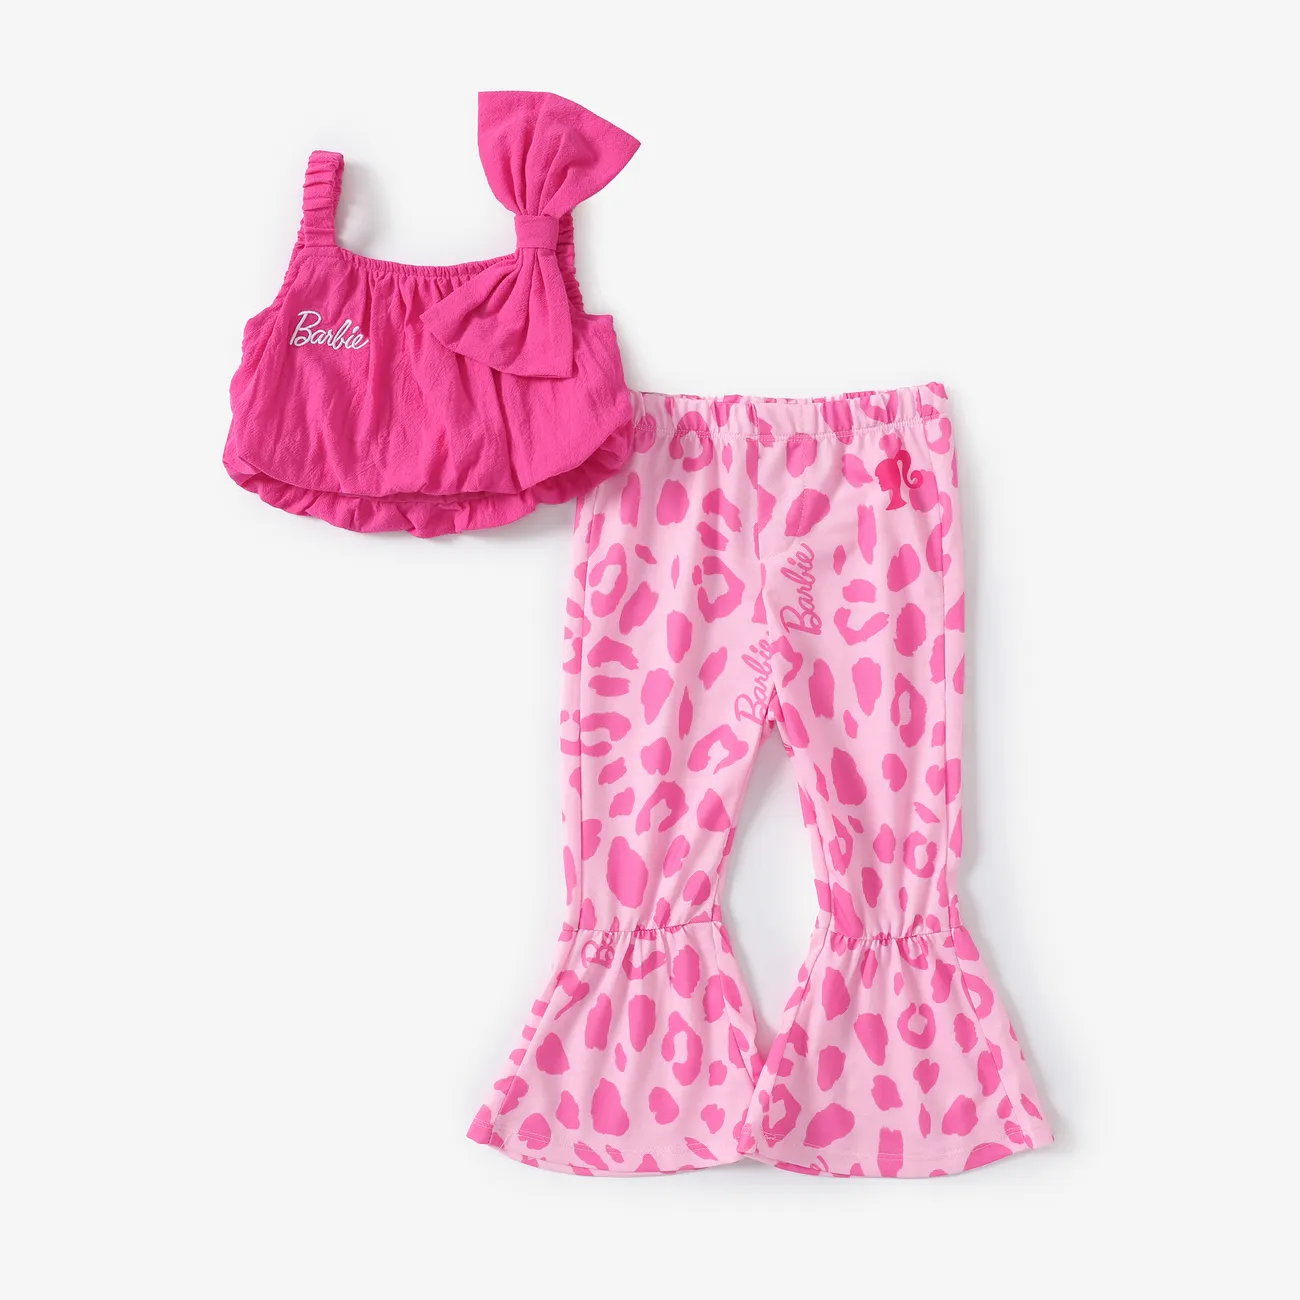 Barbie Toddler Girls 2pcs Cotton Bow Twist Sleeveless Top with Leopord Flare Pants Set Roseo big image 1